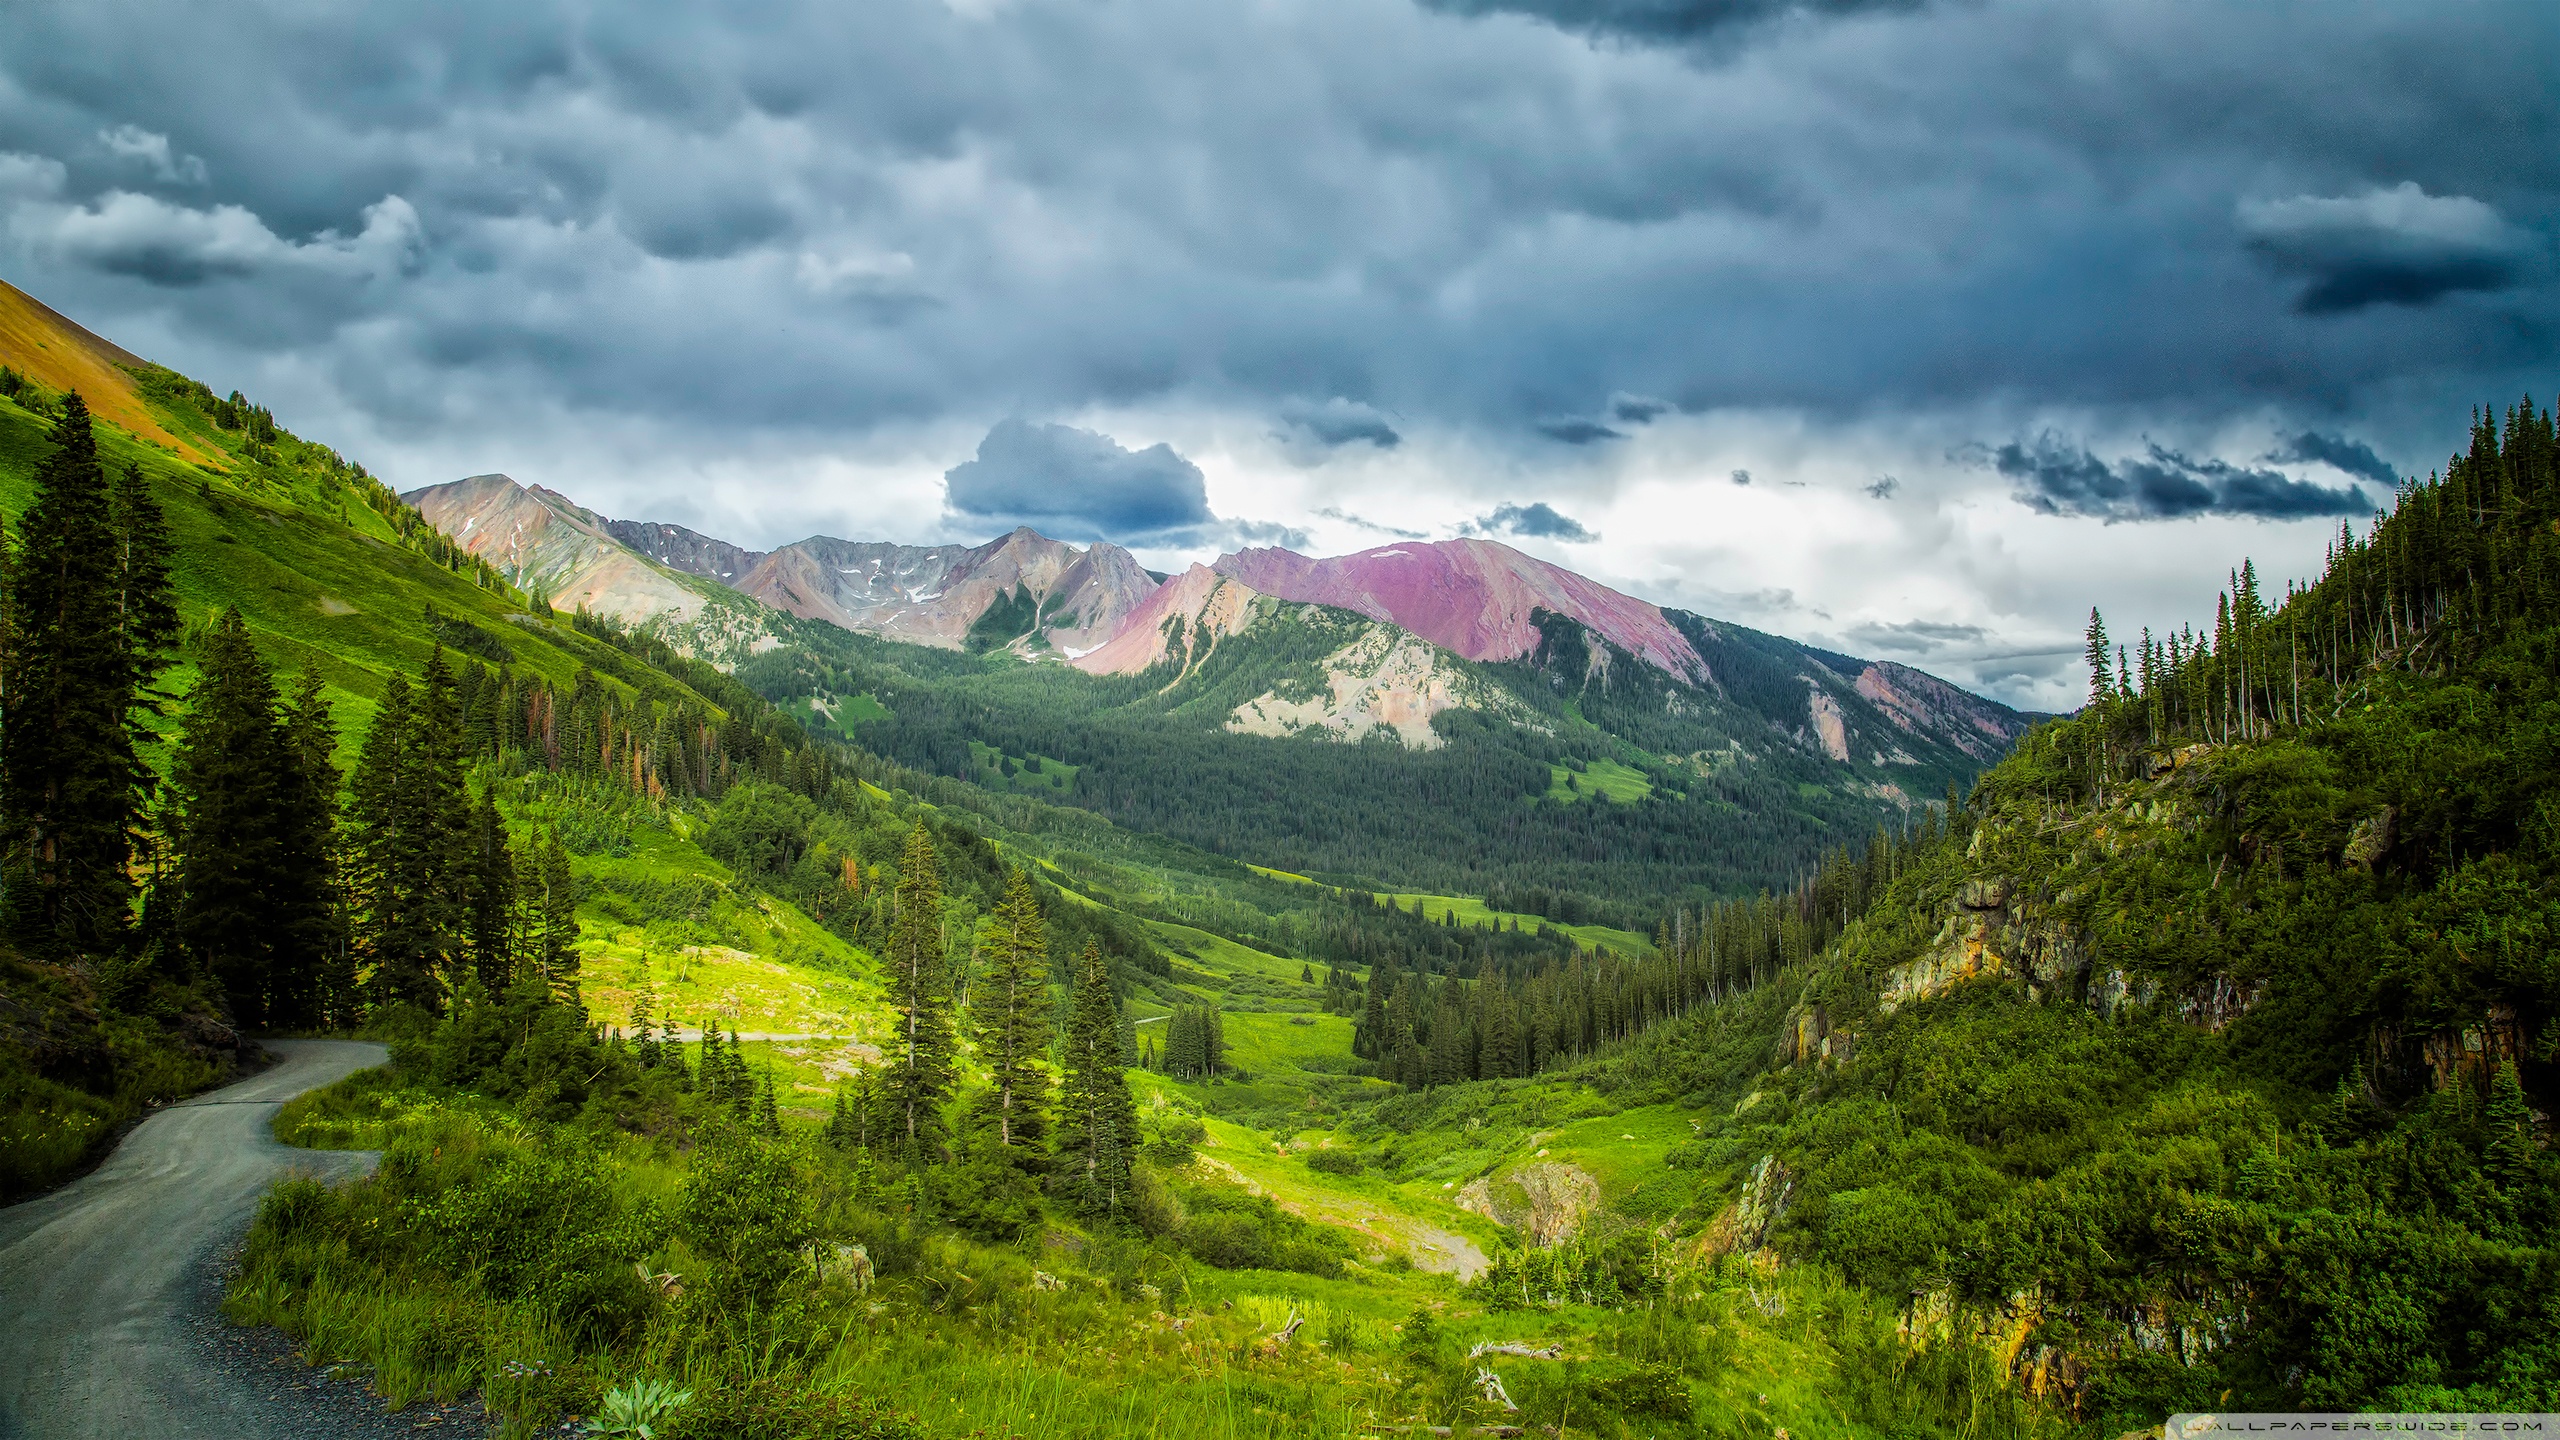 crested_butte_gothic_road-wallpaper-2560x1440.jpg